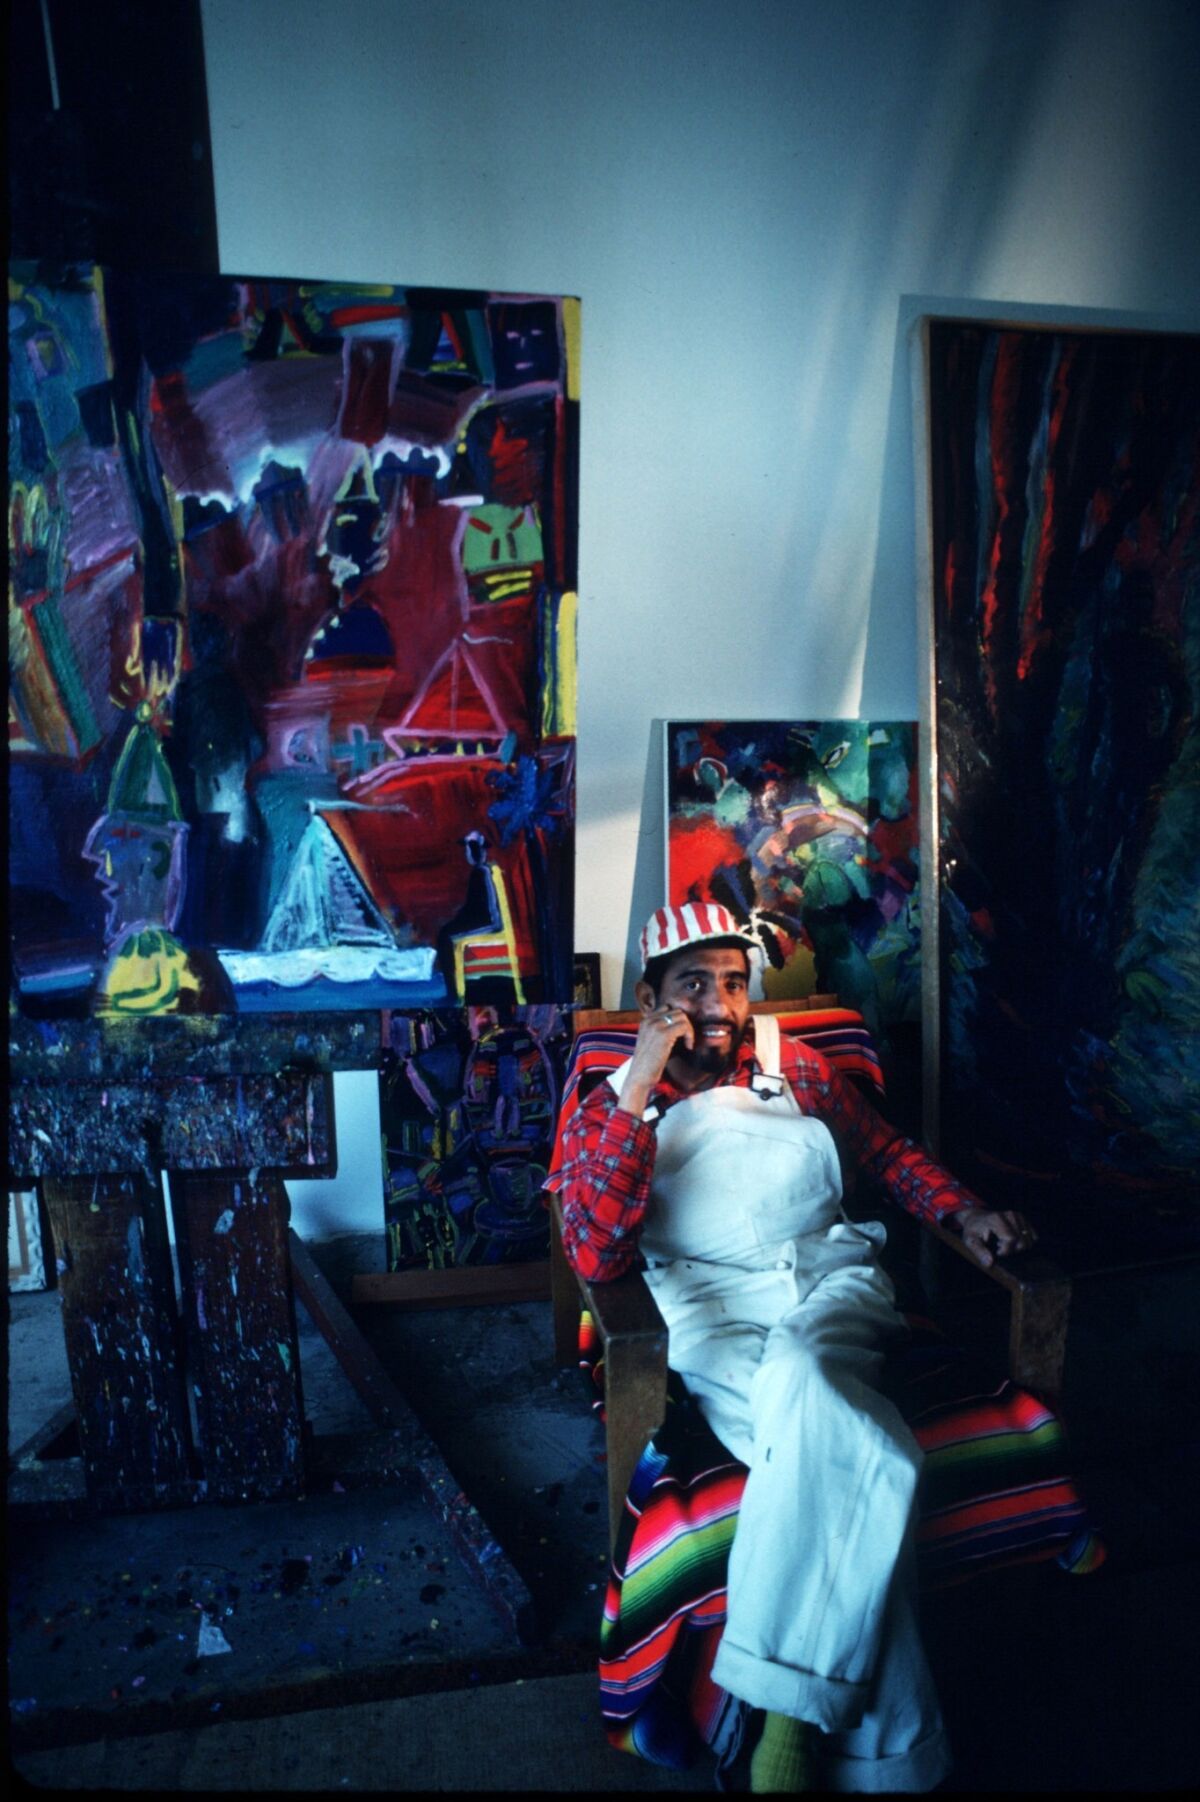 Artist Carlos Almarez in his studio on June 15, 1989, six months before he died of complications related to AIDS.